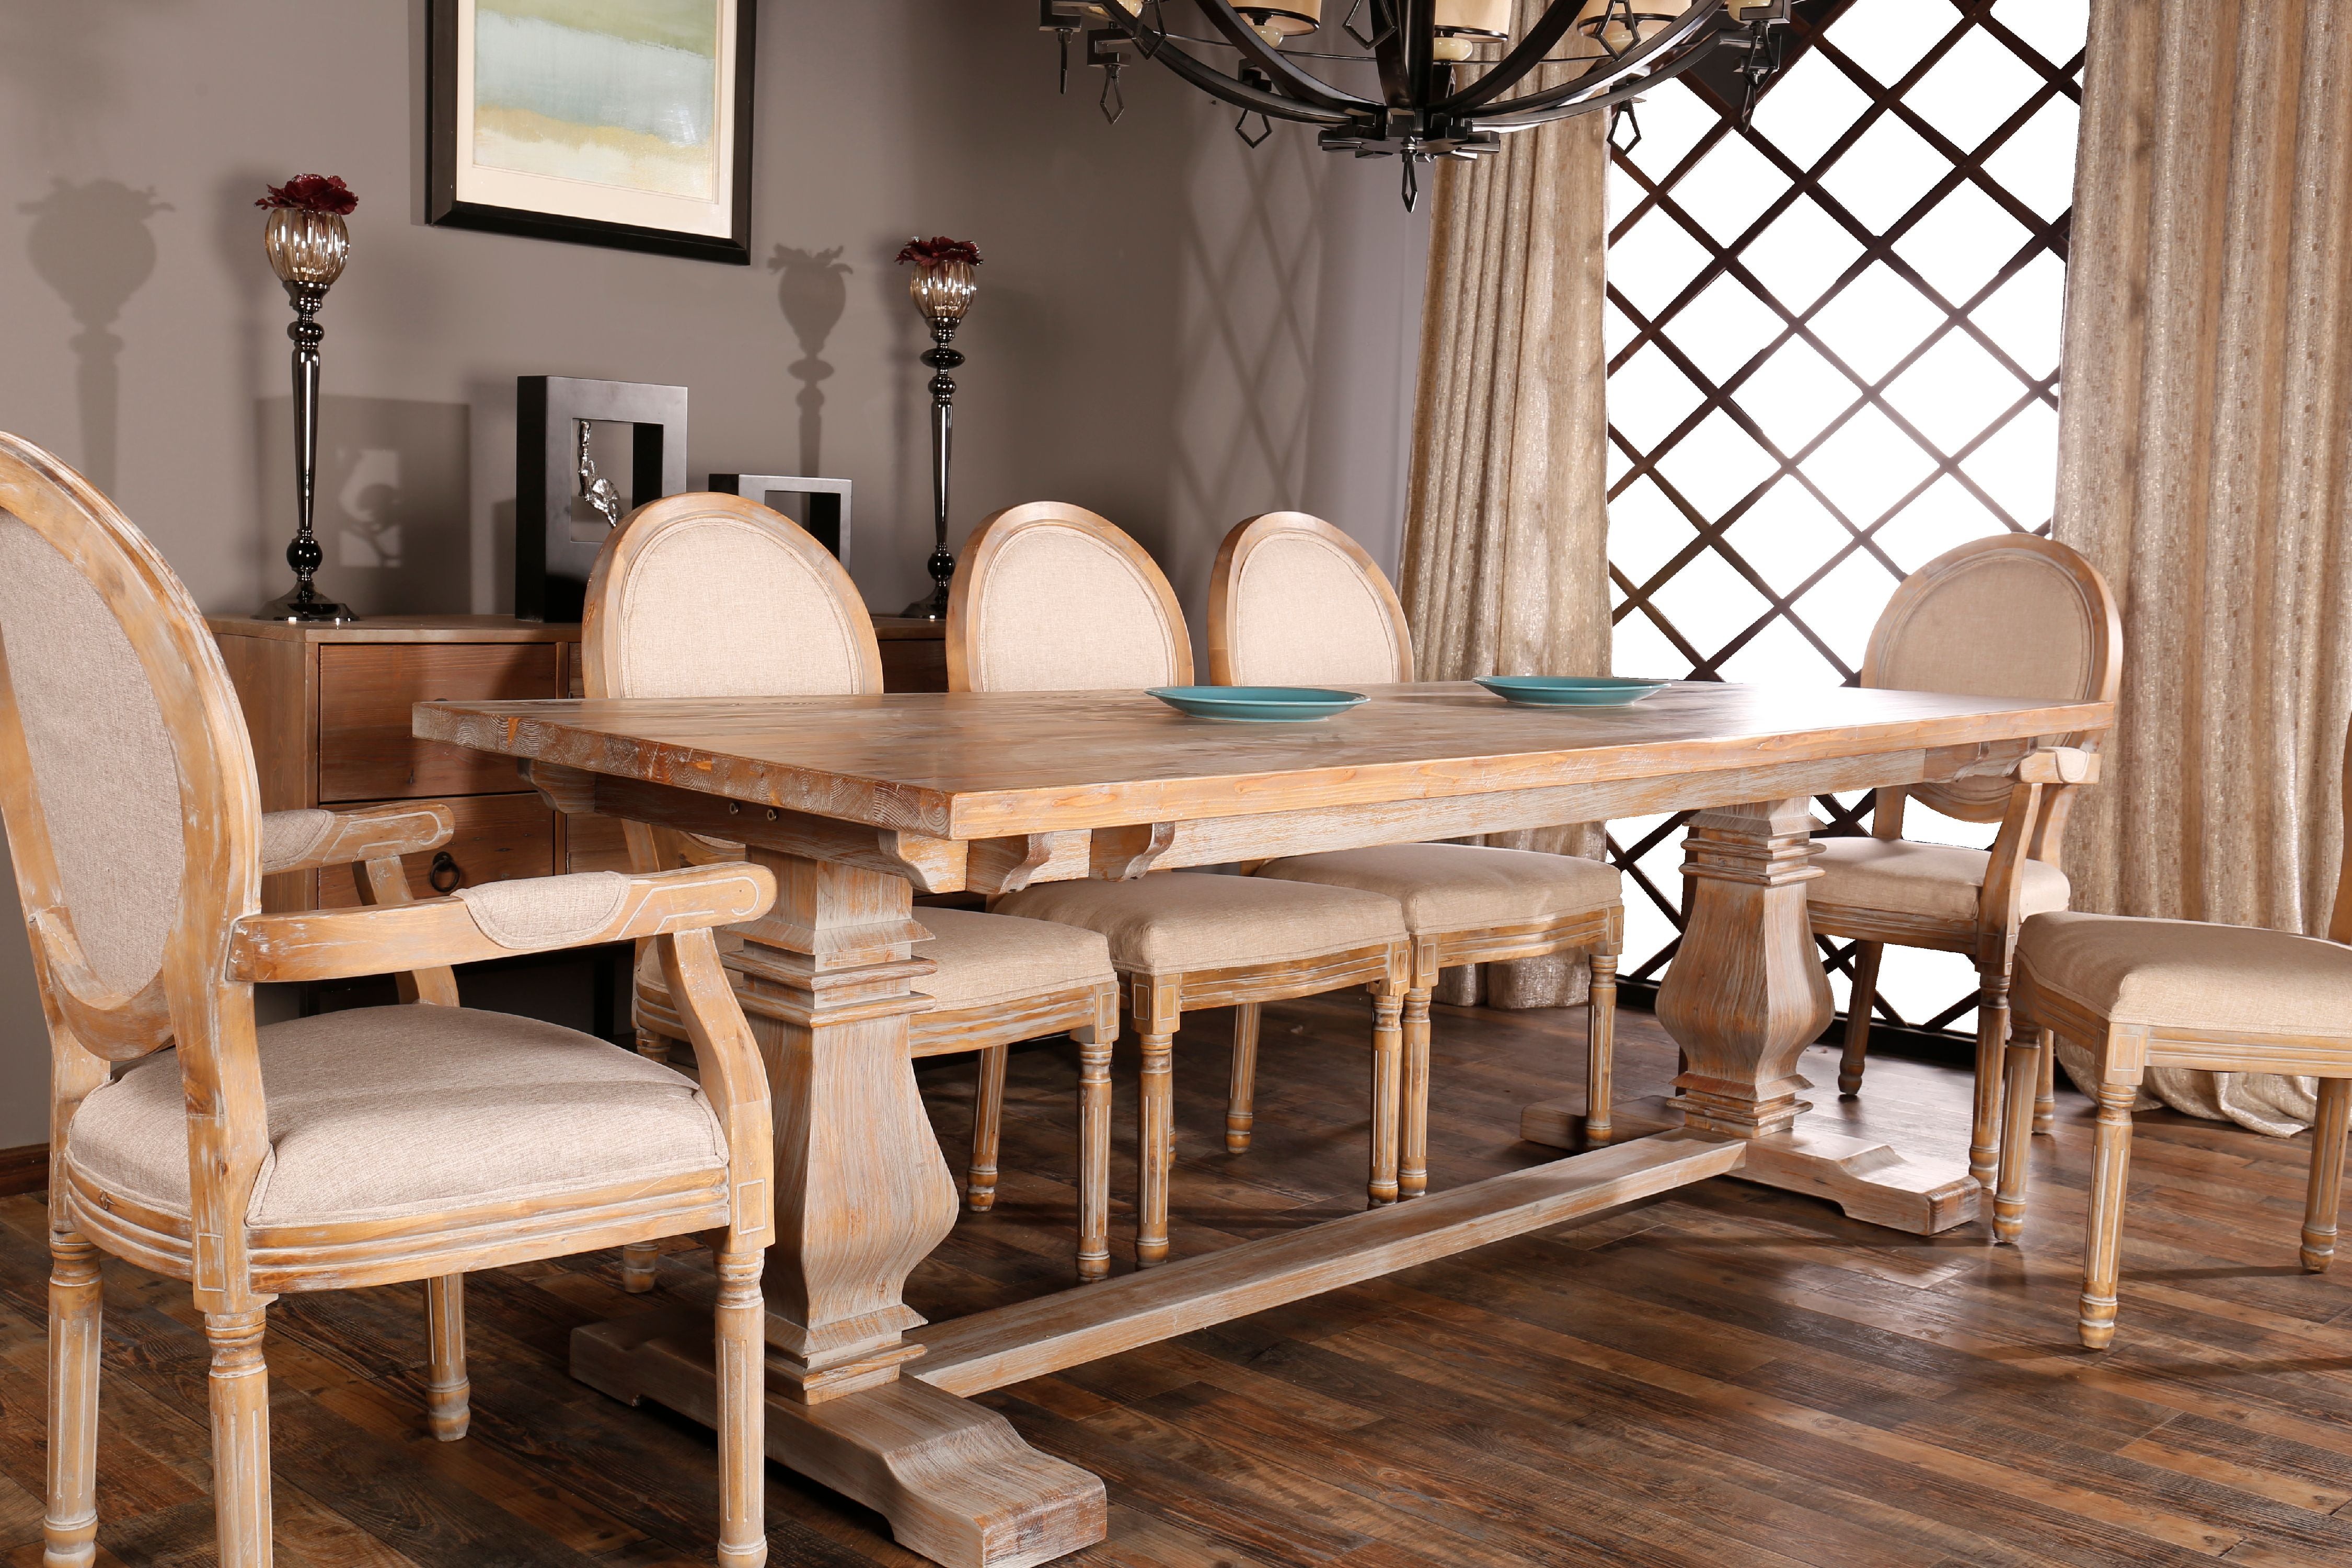 classic rustic style rectangular dining room kitchen table distressed